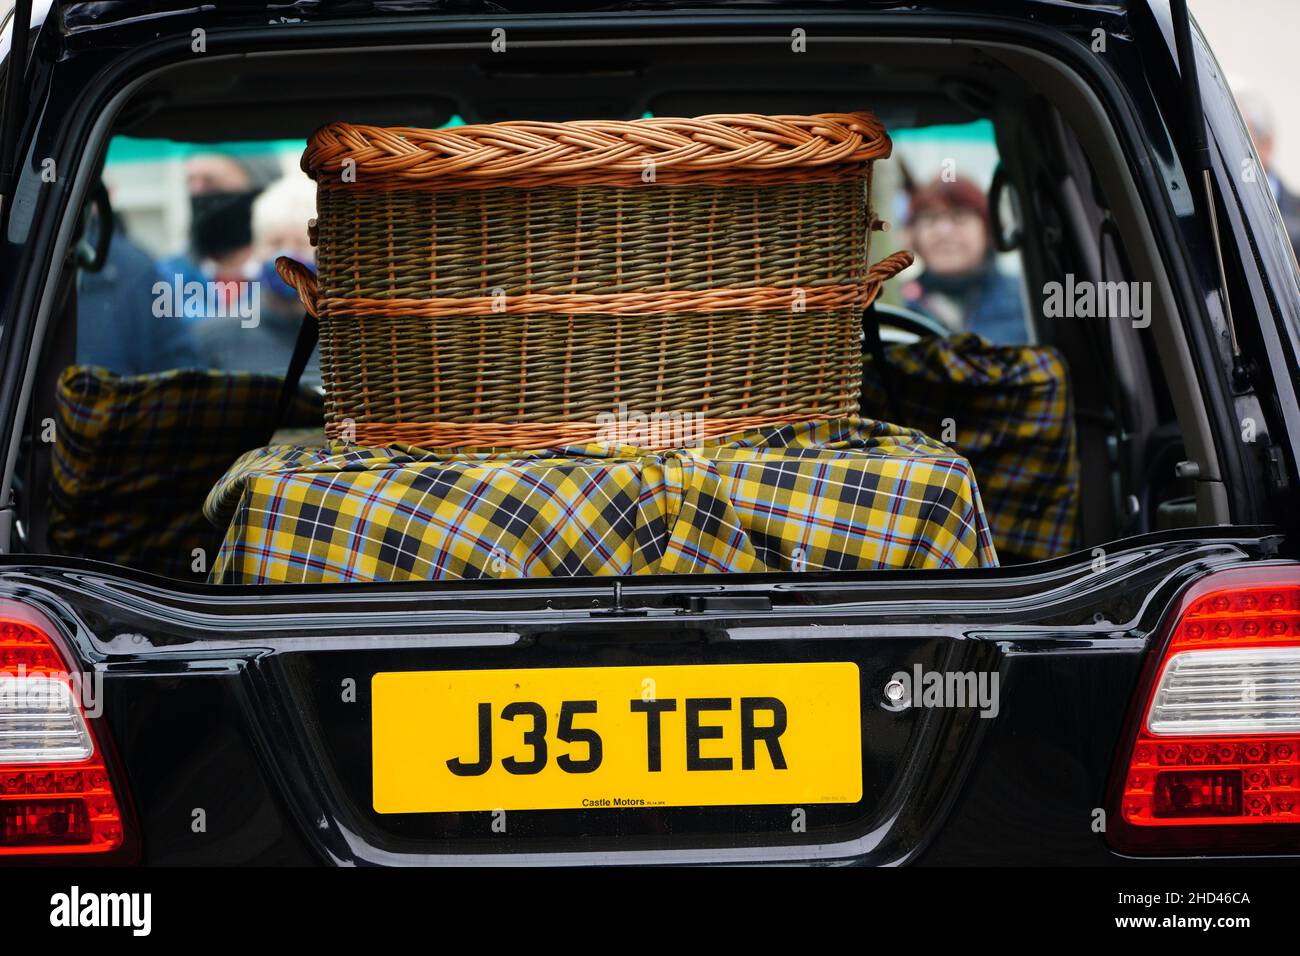 The car carrying the coffin, with personalised number plate J35TER, arrives  for the funeral of Cornish comedian Jethro at Truro Cathedral in Cornwall.  Jethro, real name Geoffrey Rowe, died on December 14